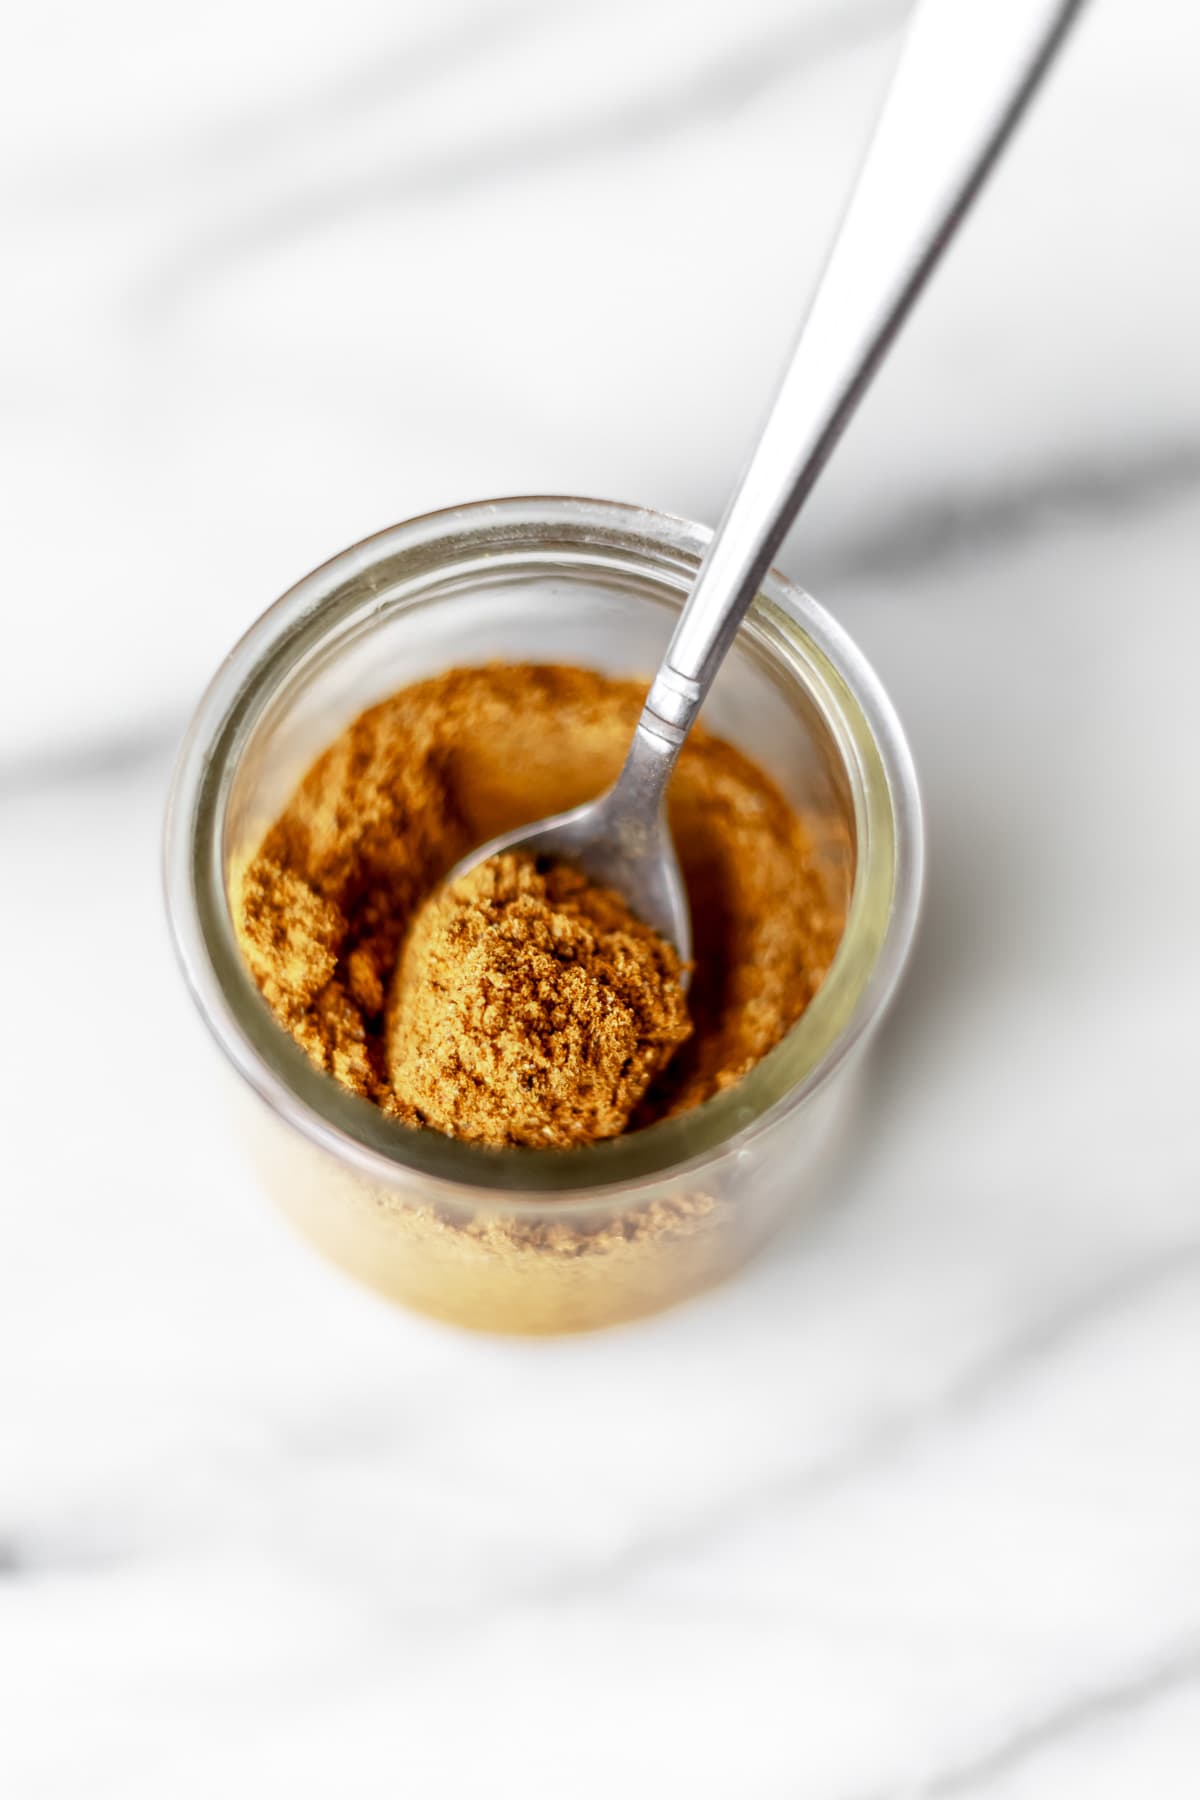 A glass jar of curry powder with a small spoon in it over a marble background.